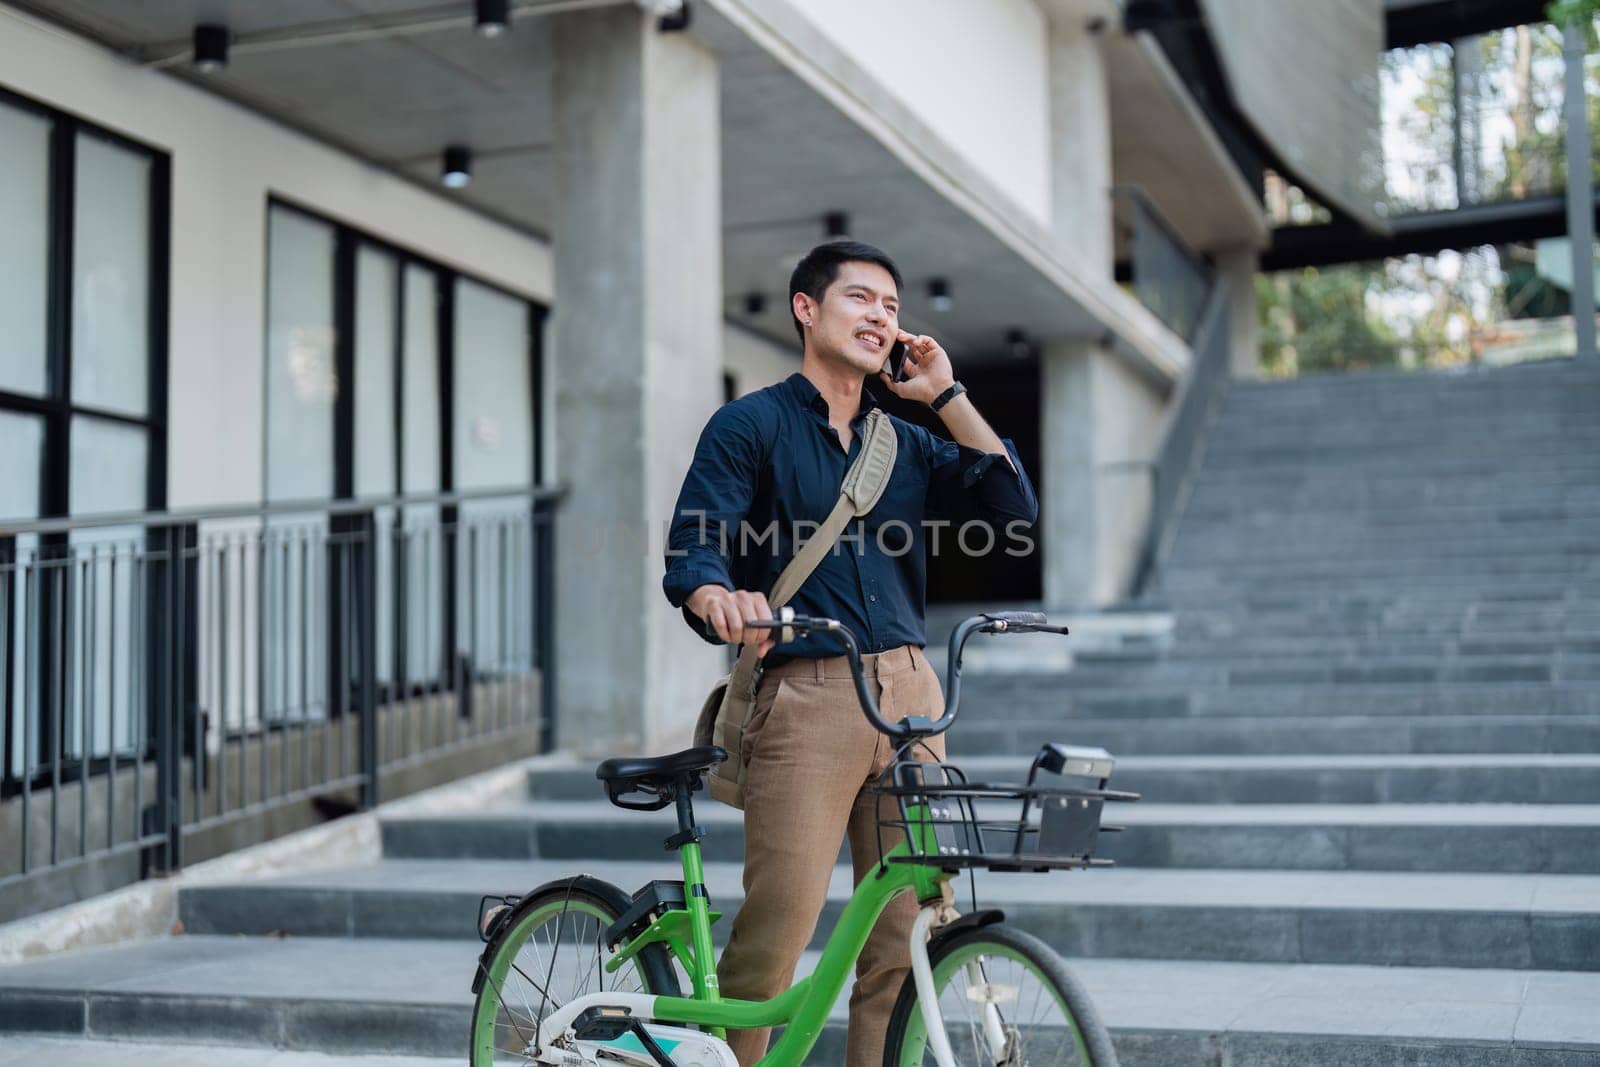 A man in a suit is standing next to a bicycle with a basket on it. He is looking at his cell phone